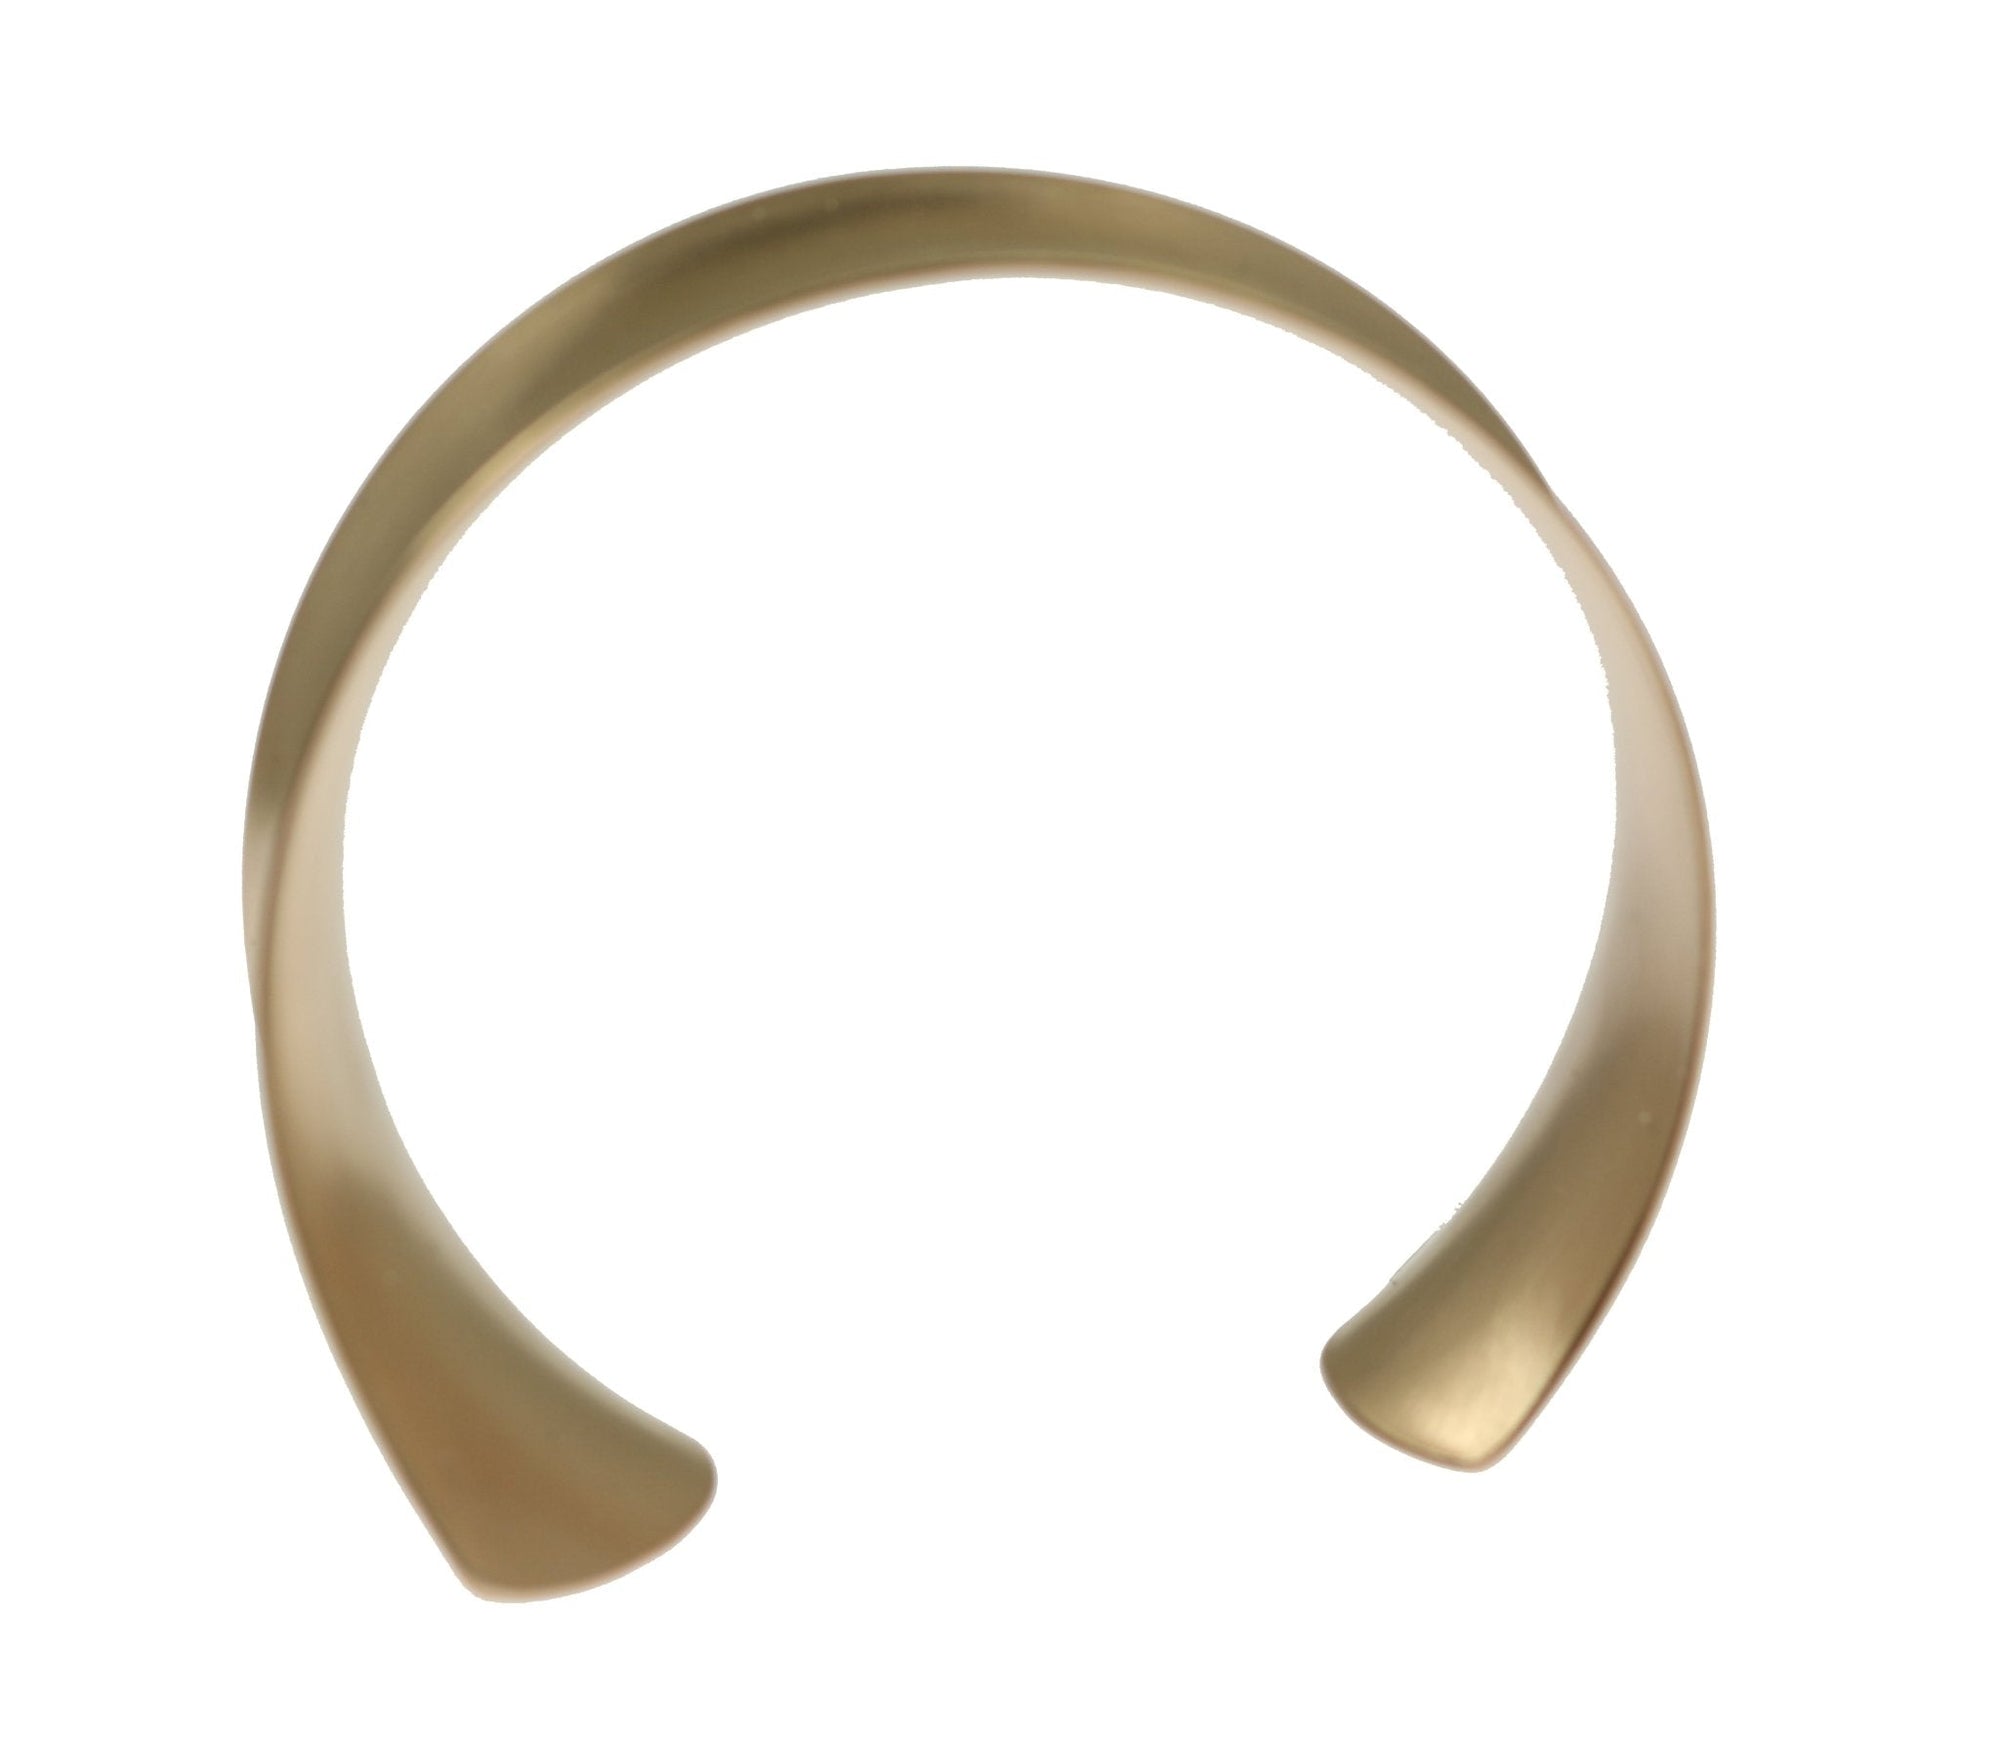 Shape of Tapered Brushed Bronze Anticlastic Cuff